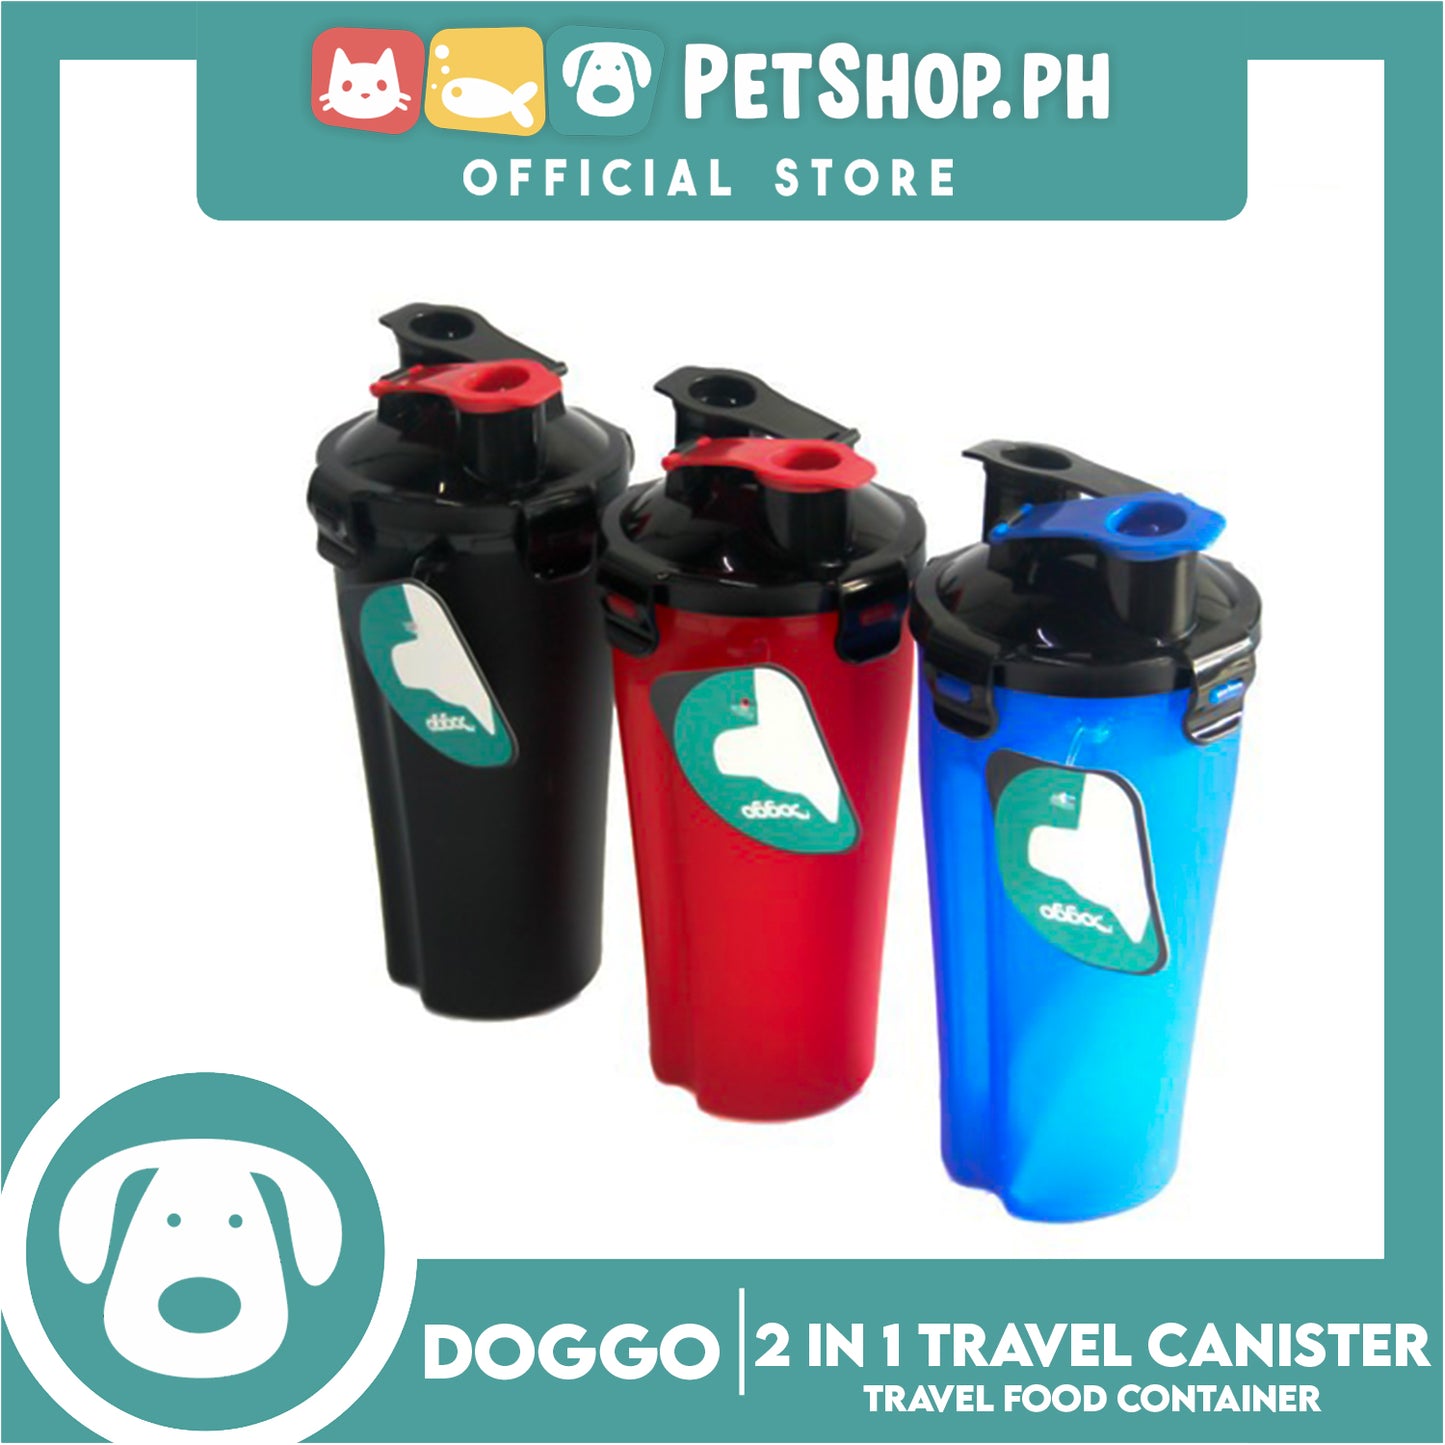 Doggo 2 in 1 Travel Canister, Durable Hard Plastic (Red)